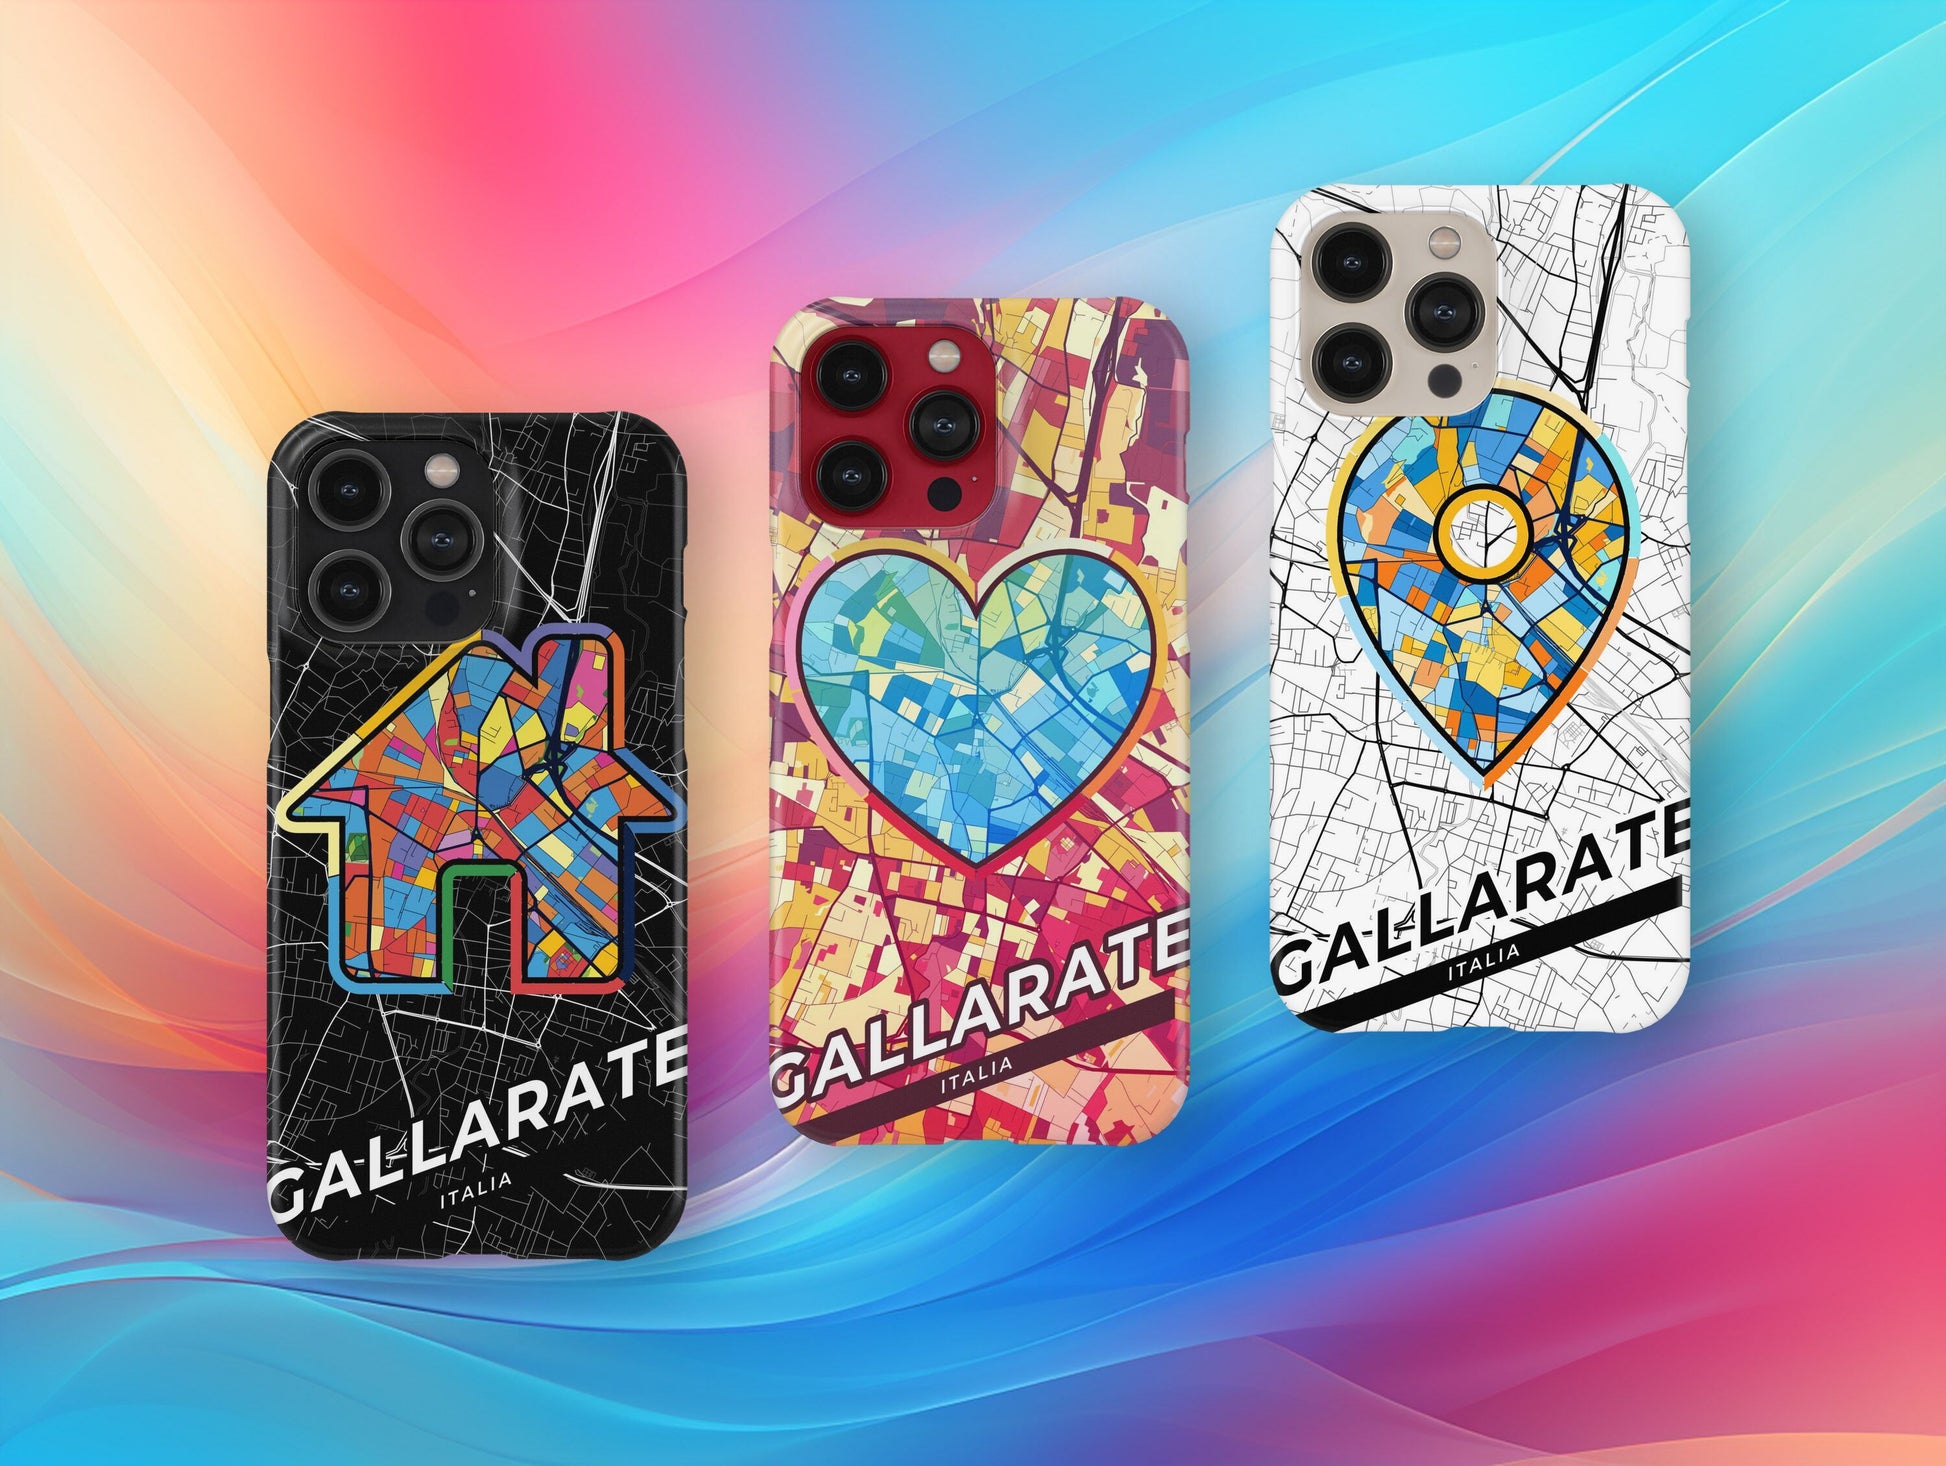 Gallarate Italy slim phone case with colorful icon. Birthday, wedding or housewarming gift. Couple match cases.